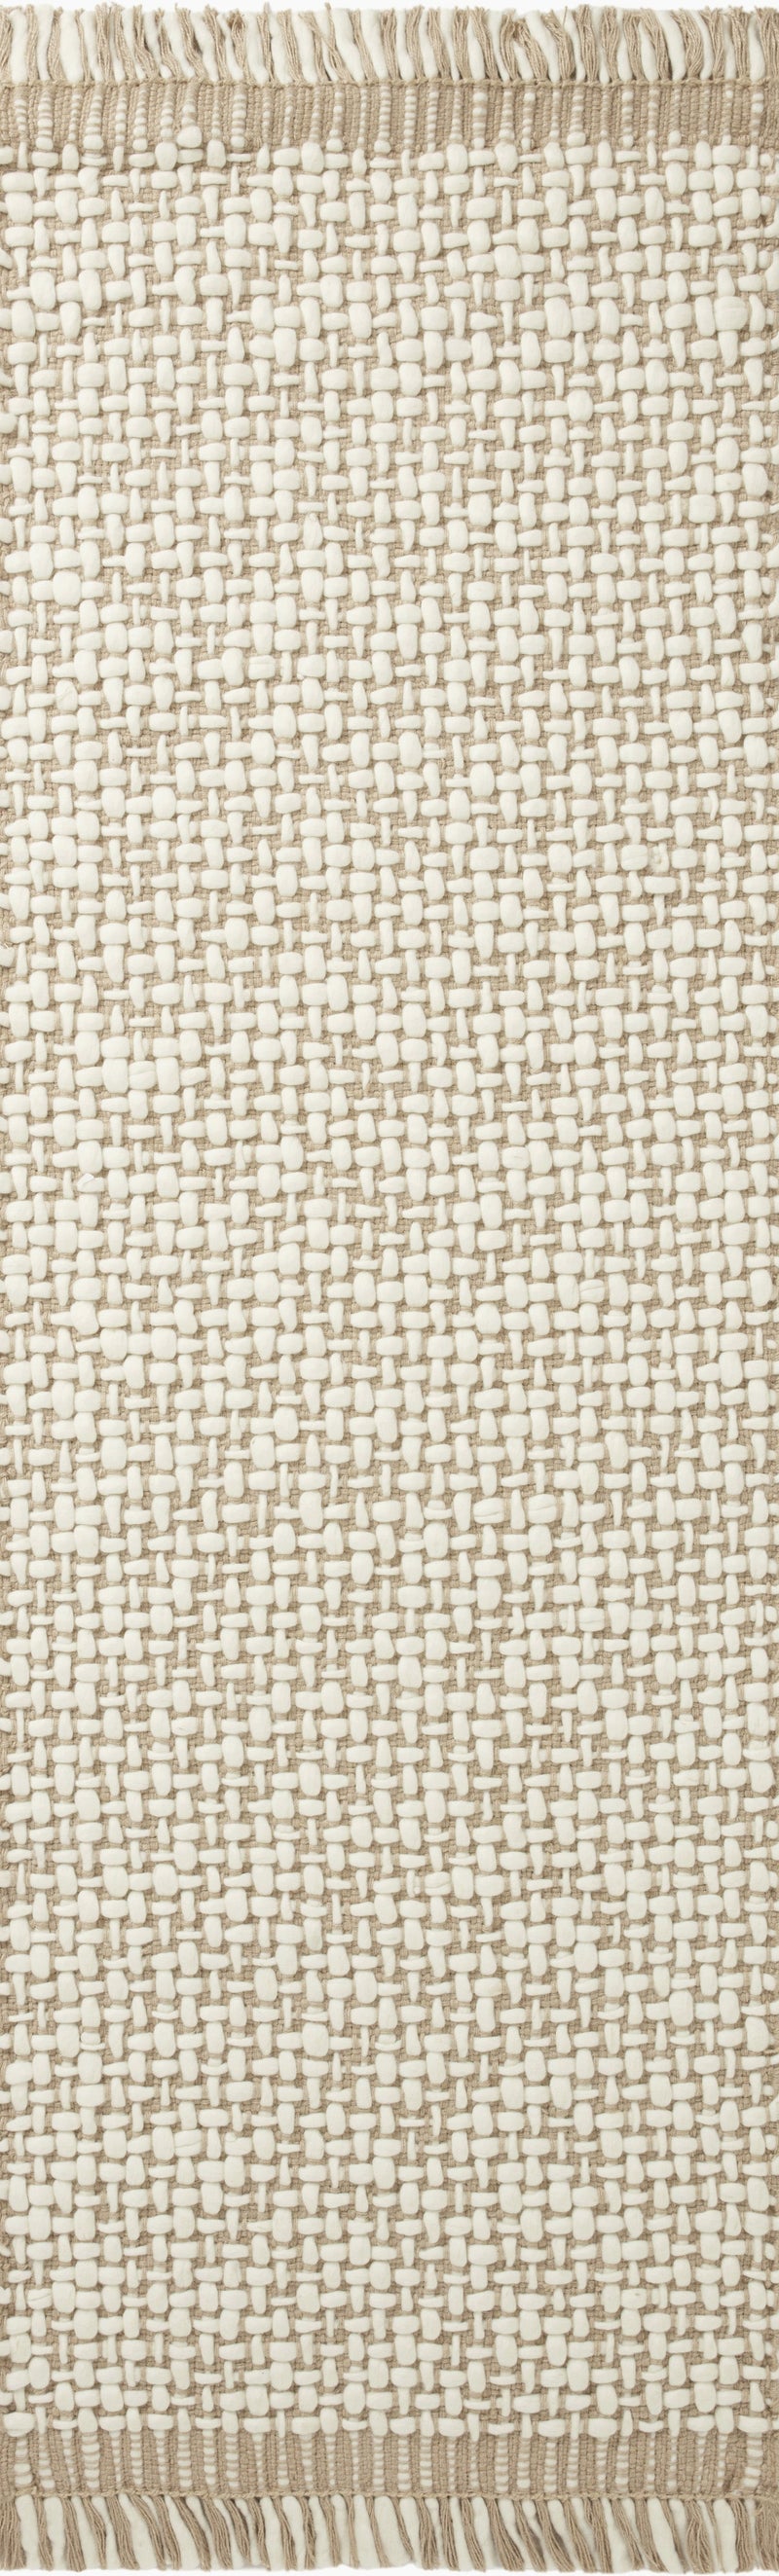 media image for Yellowstone Hand Woven Natural Ivory Rug By Amber Lewis X Loloi Yeloyel 01Naivb6F0 2 20